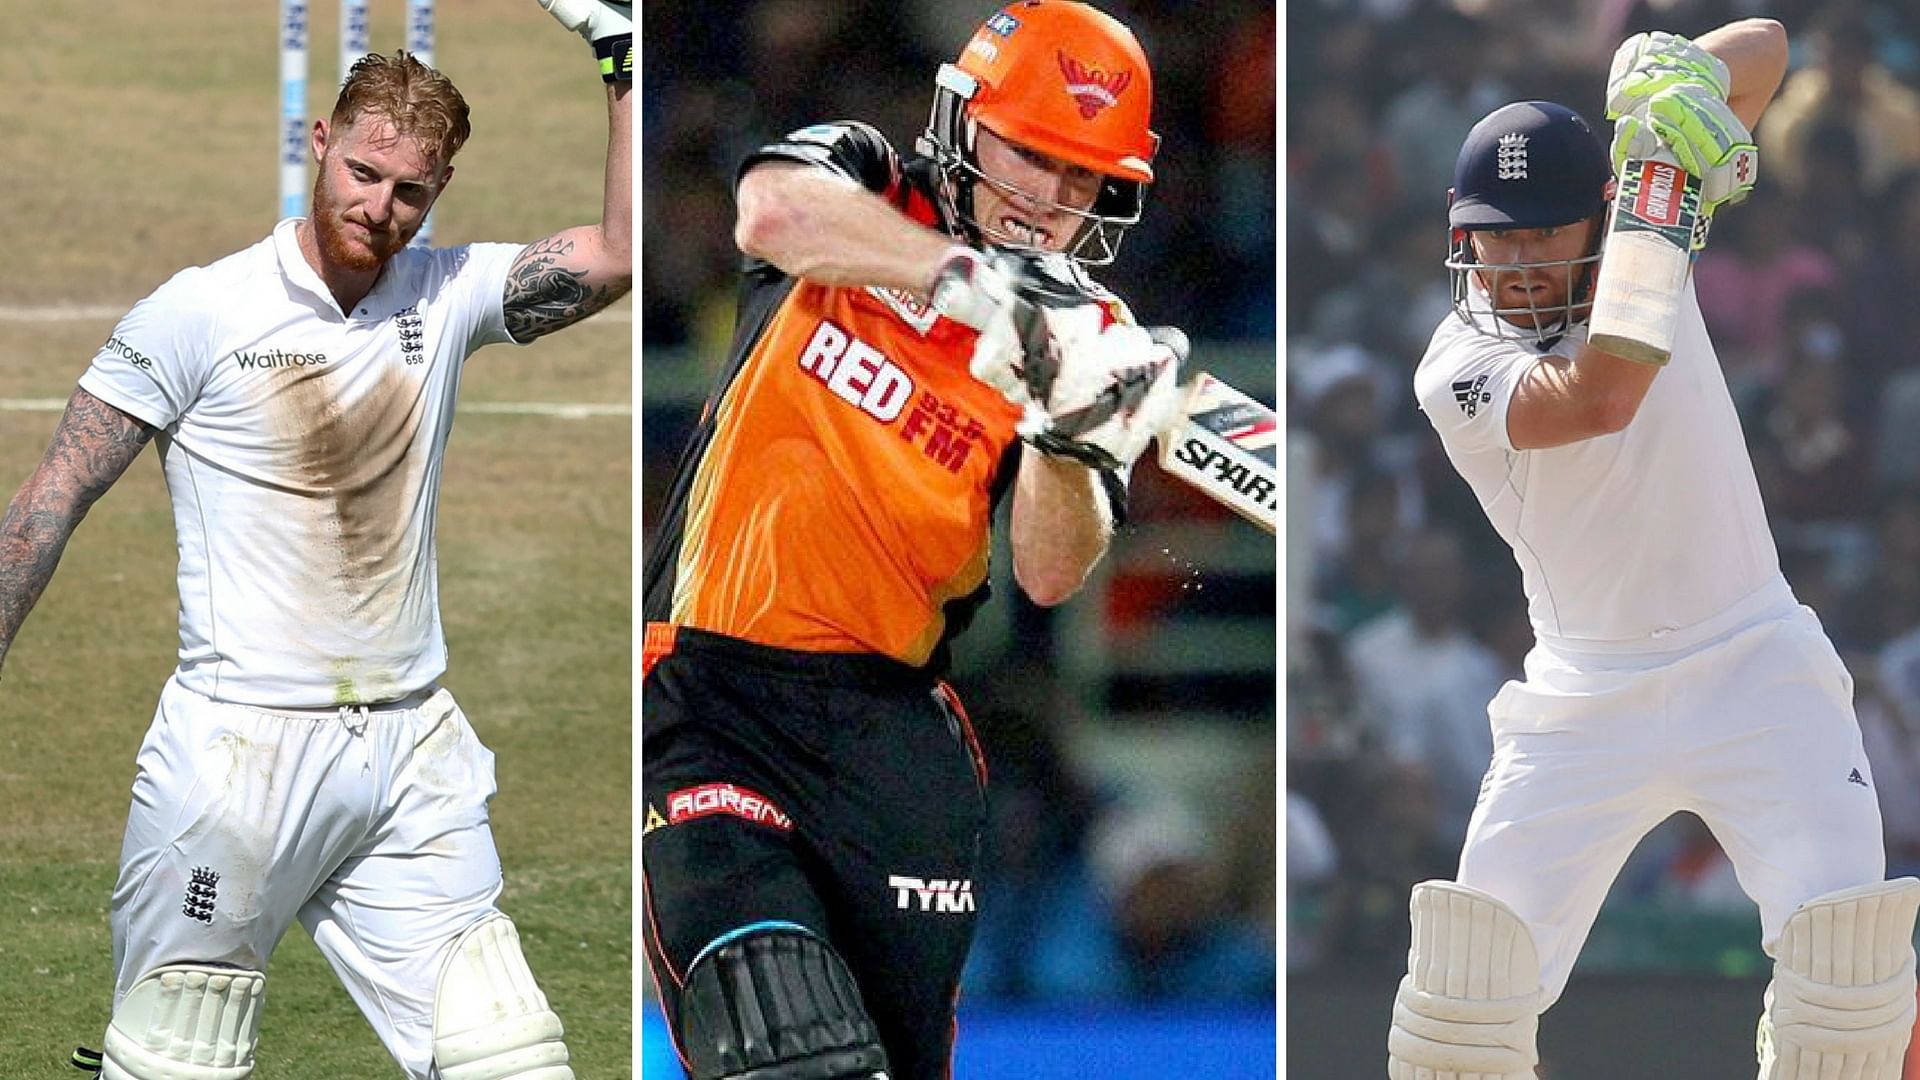 Ben Stokes, Eoin Morgan and Jonny Bairstow are up for grabs in the IPL auction this year. (Photo: BCCI/PTI)